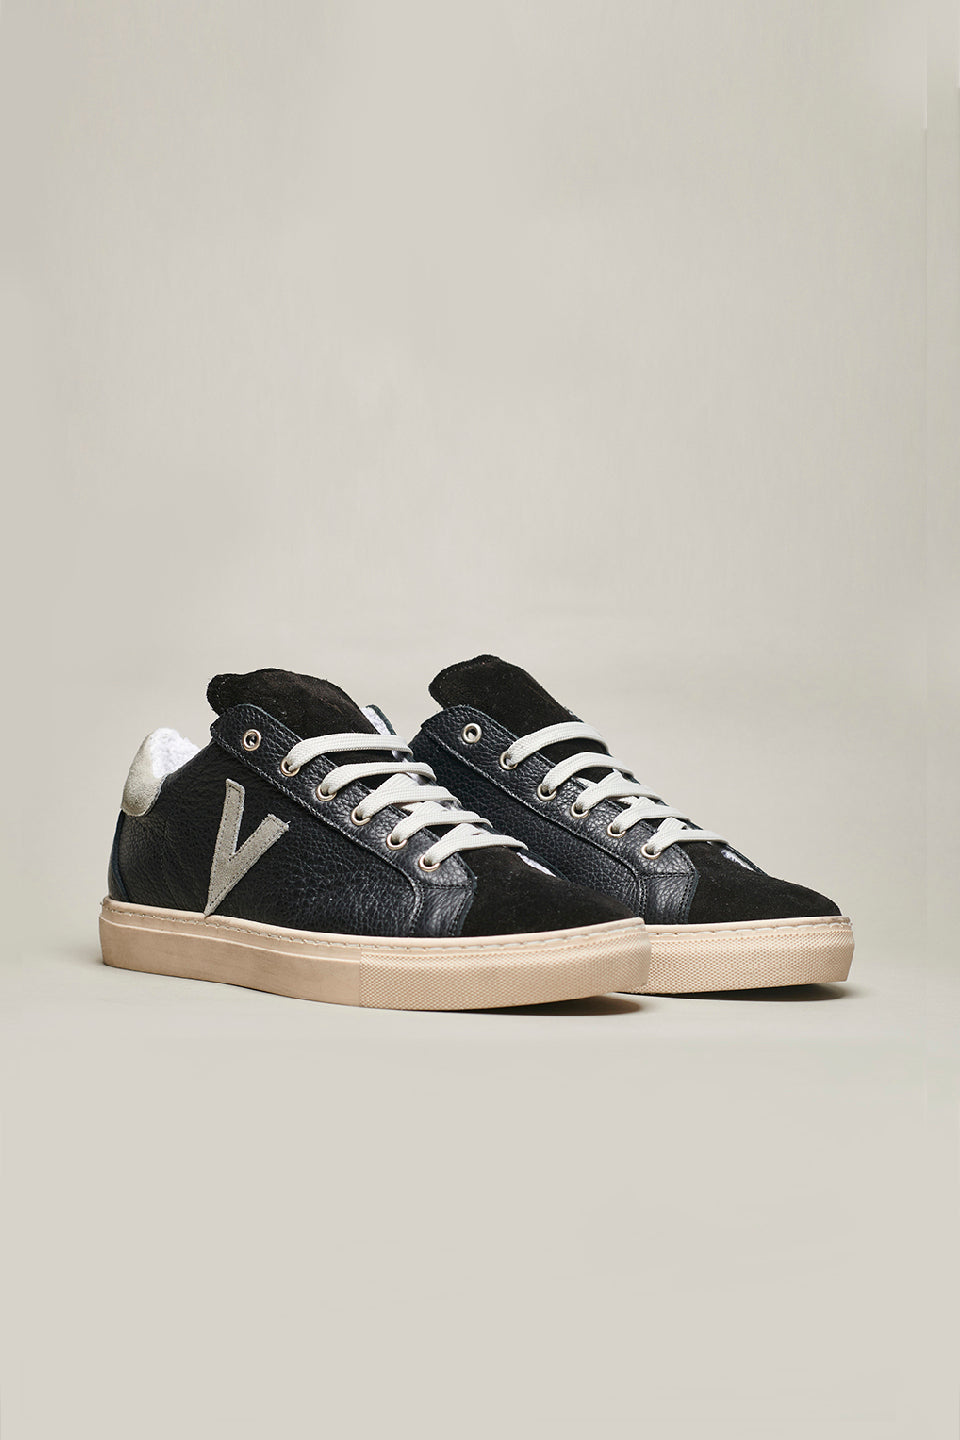 OLYMPIC - Low sole sneakers in black textured leather with gray back and insert